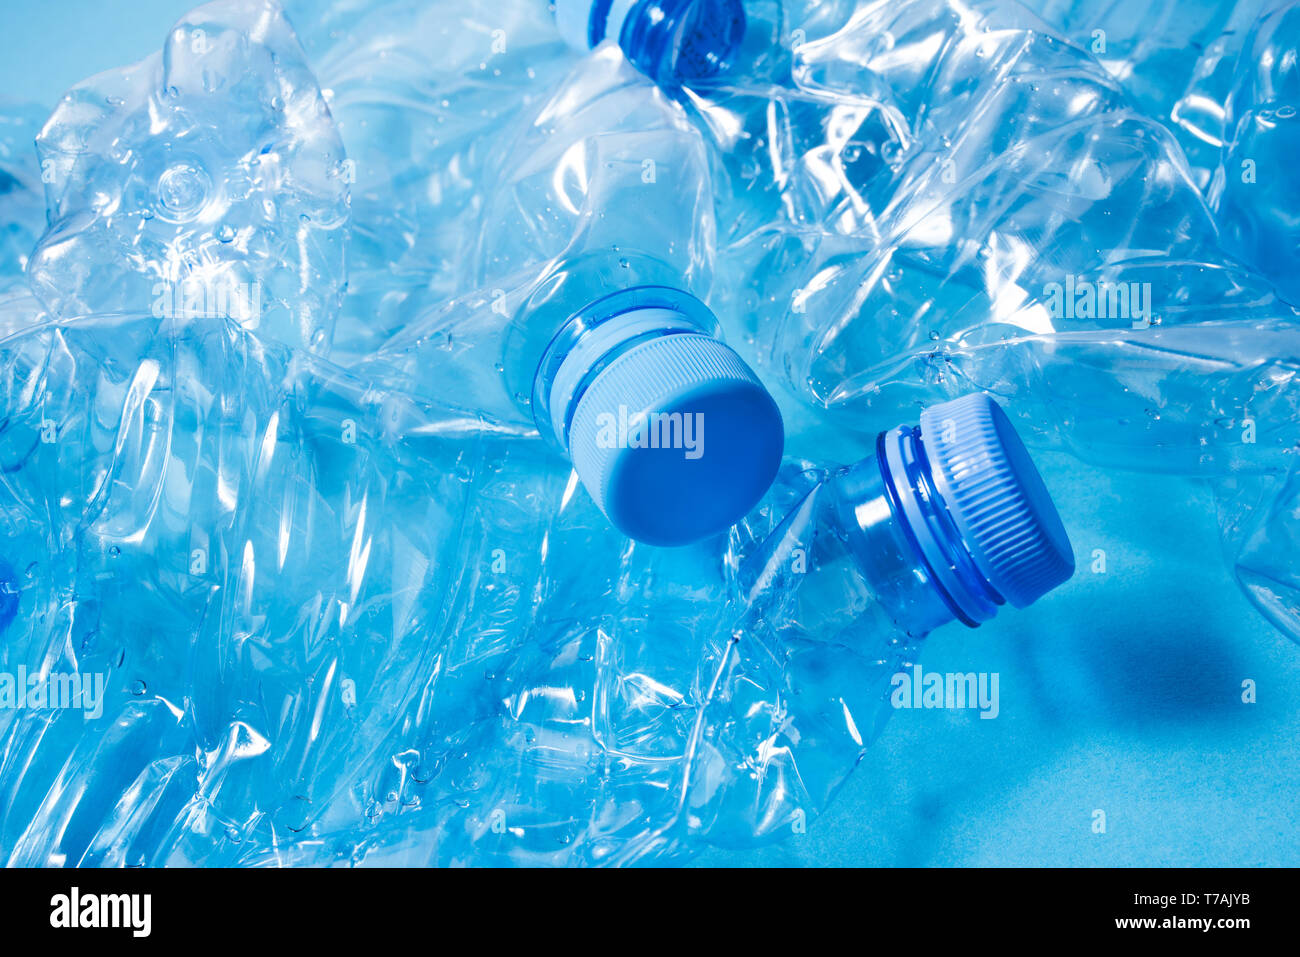 Crumpled plastic bottles of mineral water. Plastic waste Stock Photo